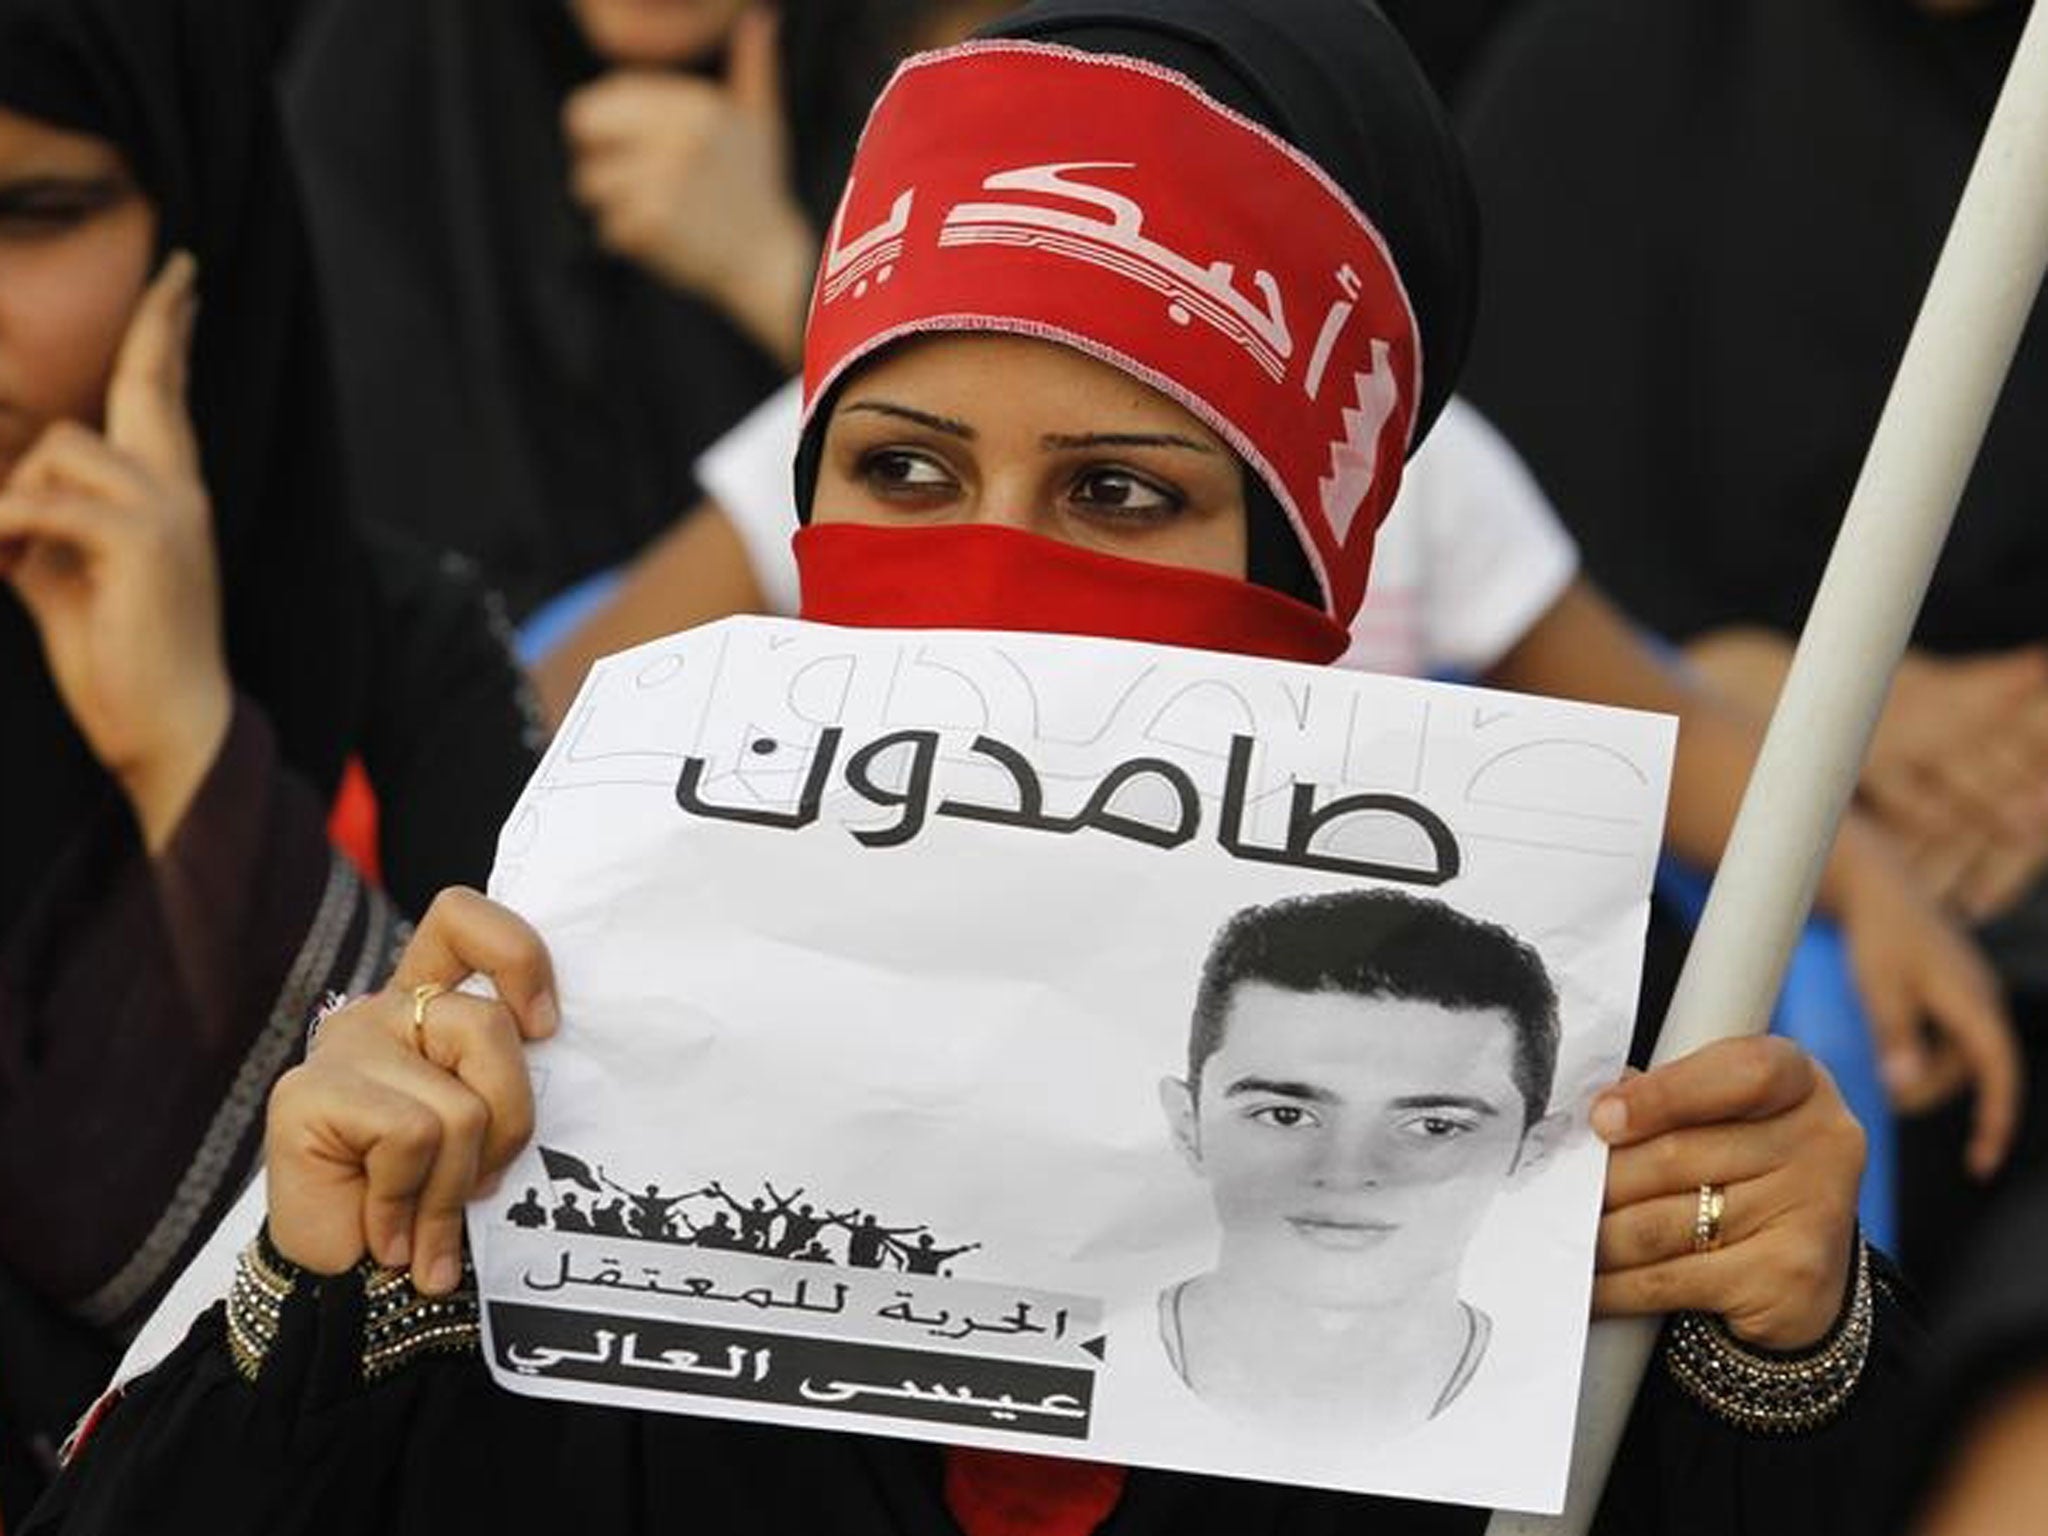 A Bahraini protester calls for Isa Alaali’s release